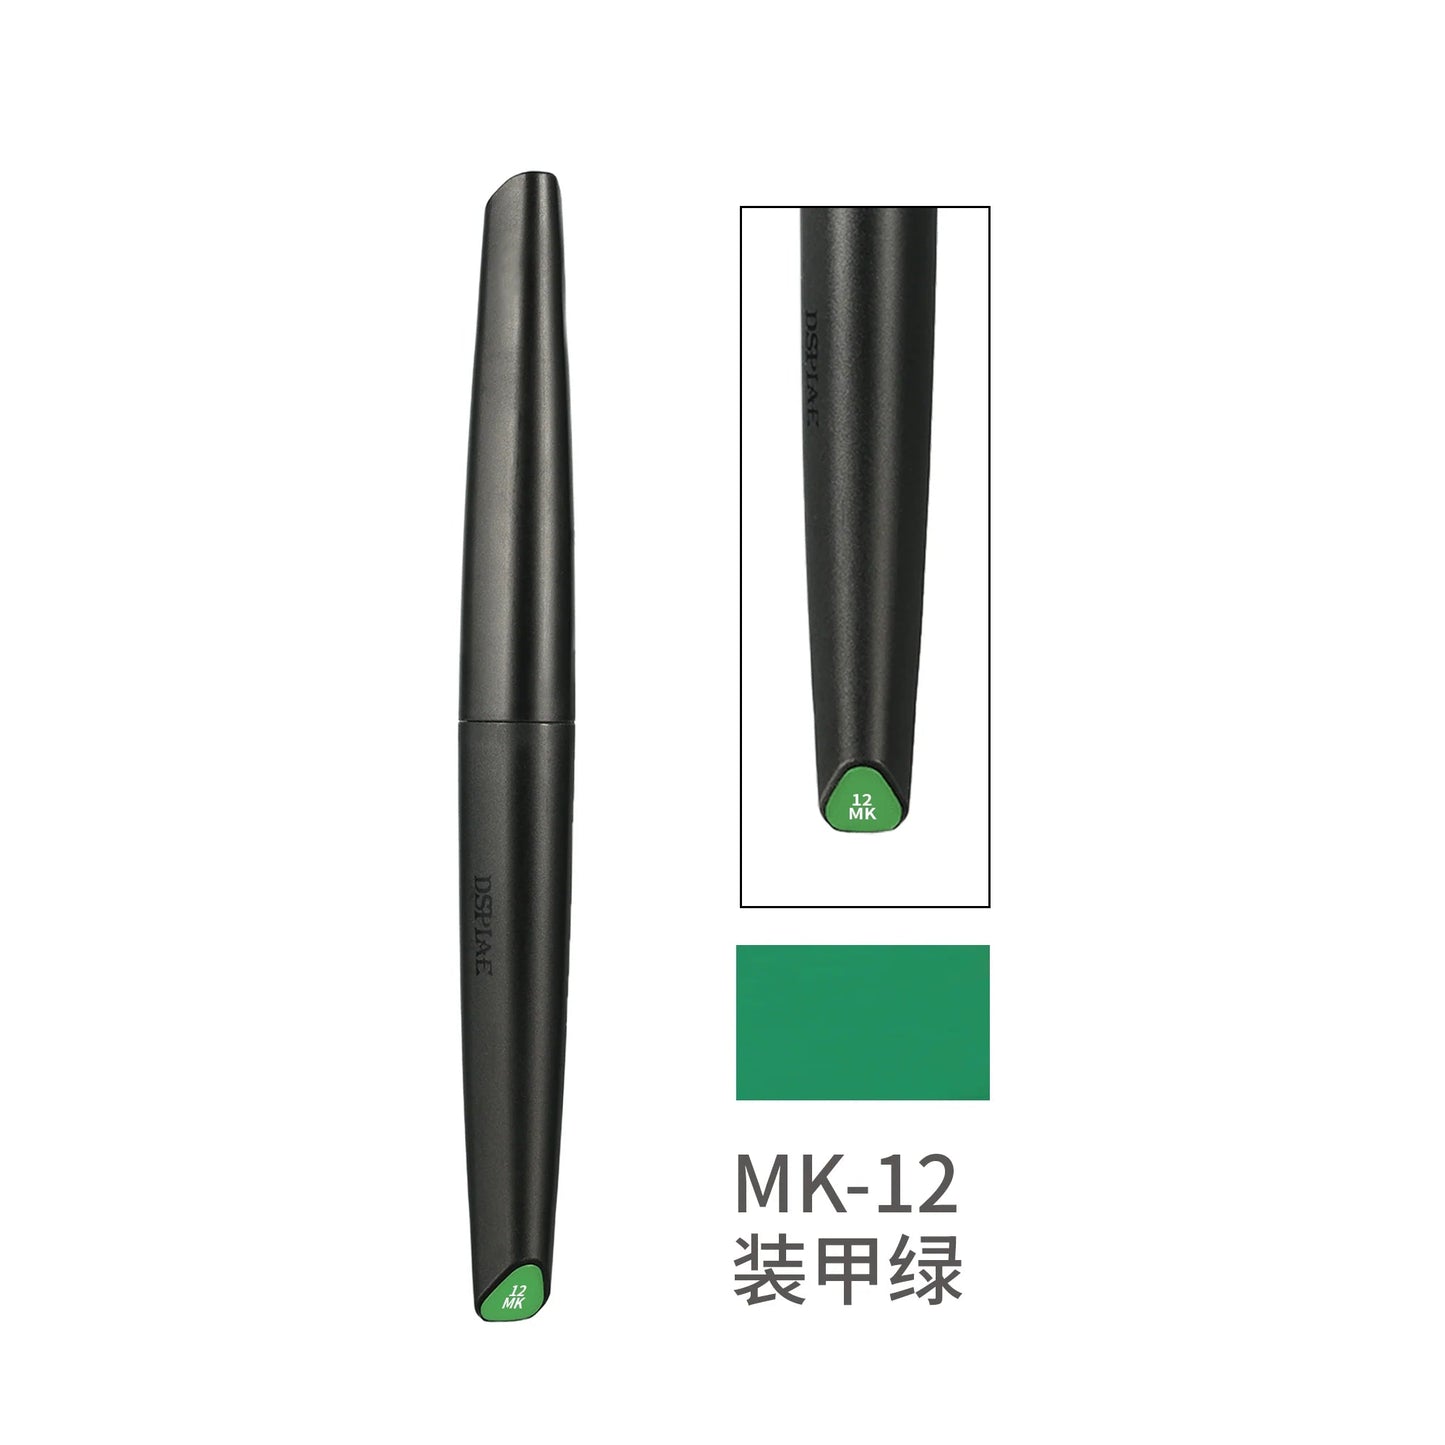 MK-12 Armored Green Soft Tipped Marker